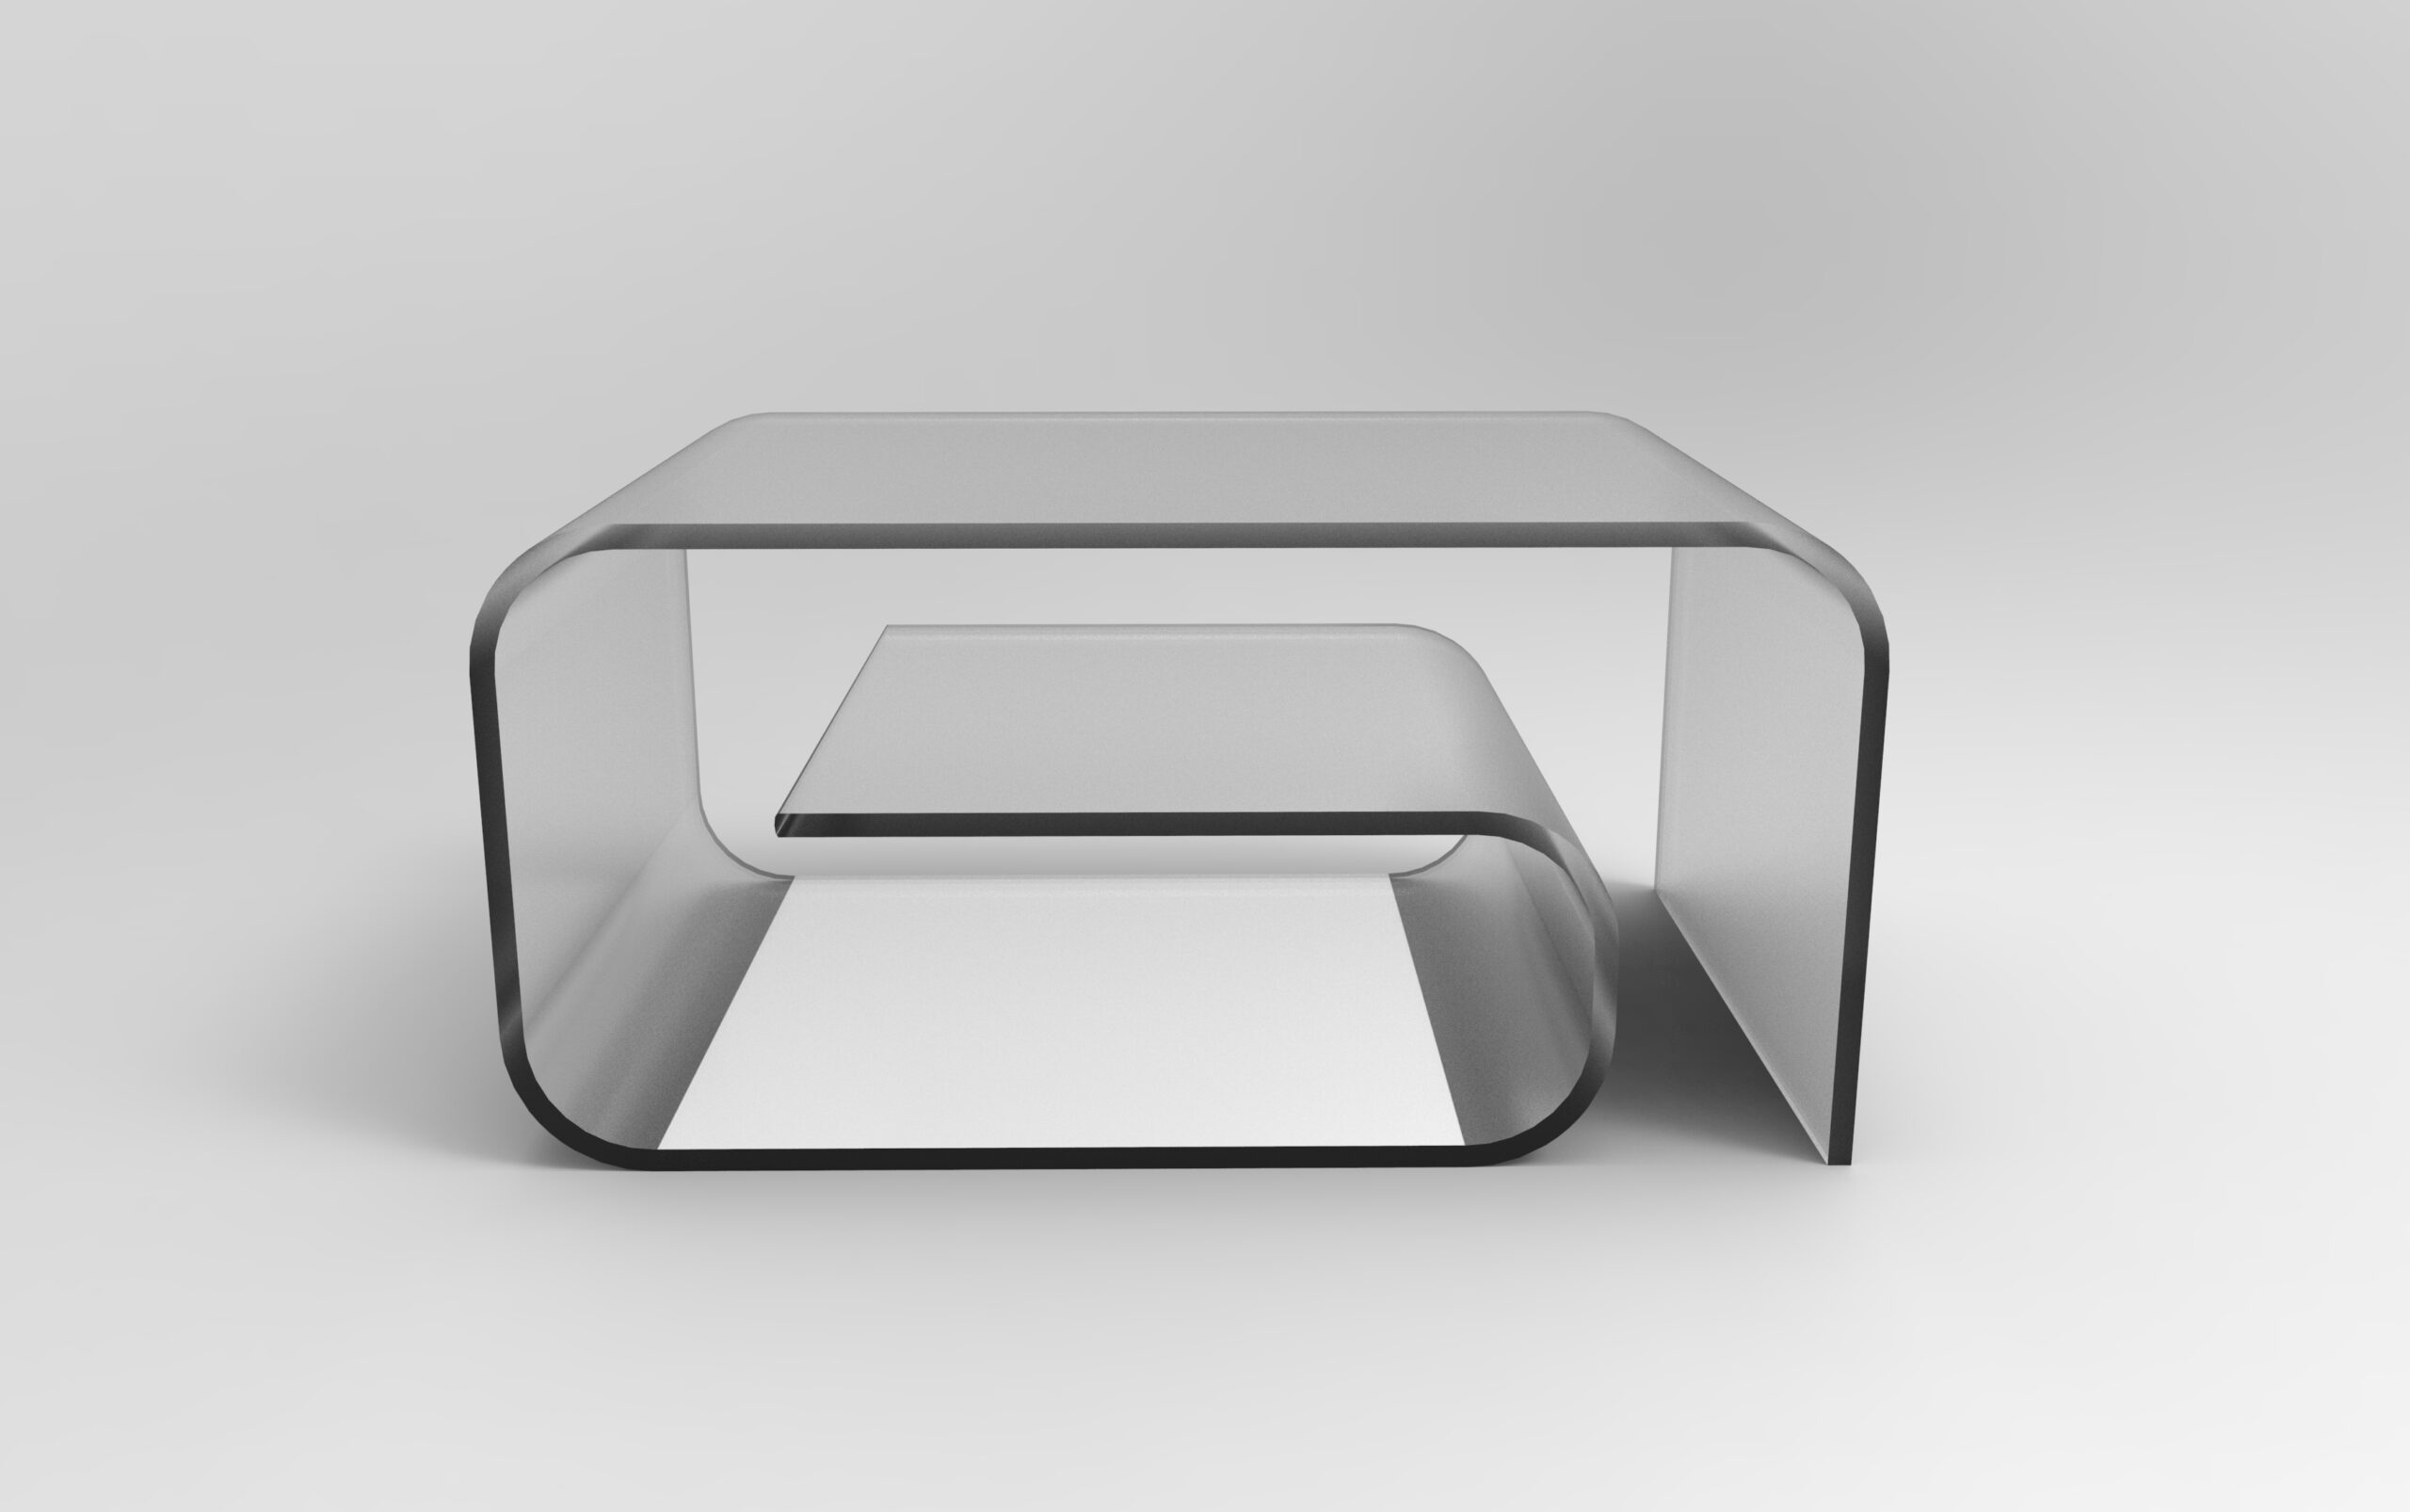 3d,Illustration,Of,Modern,Coffee,Table,On,A,White,Background